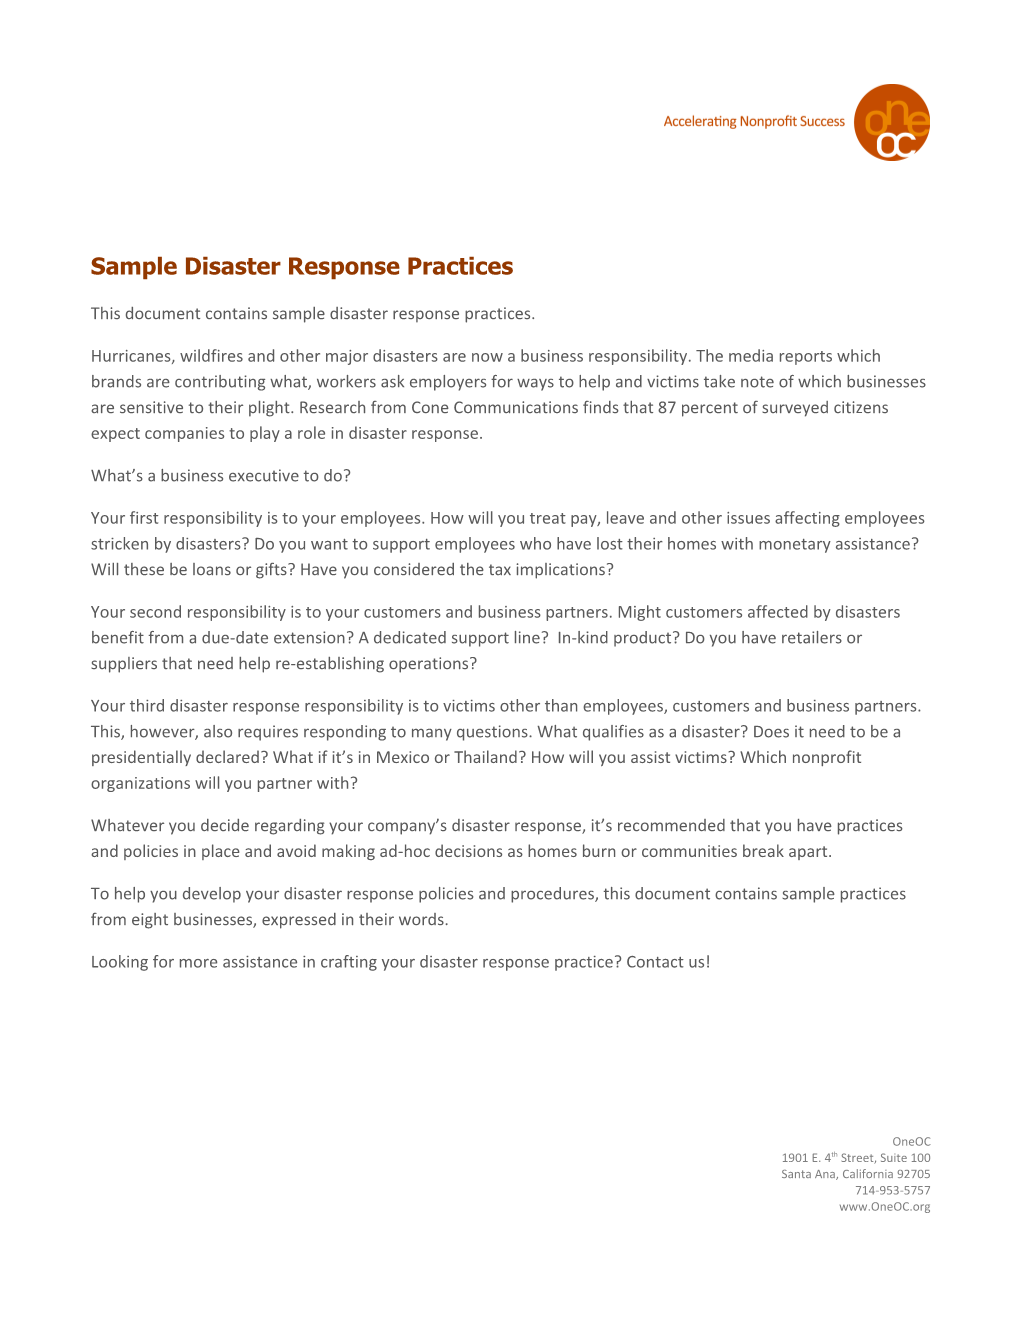 Sample Disaster Response Practices